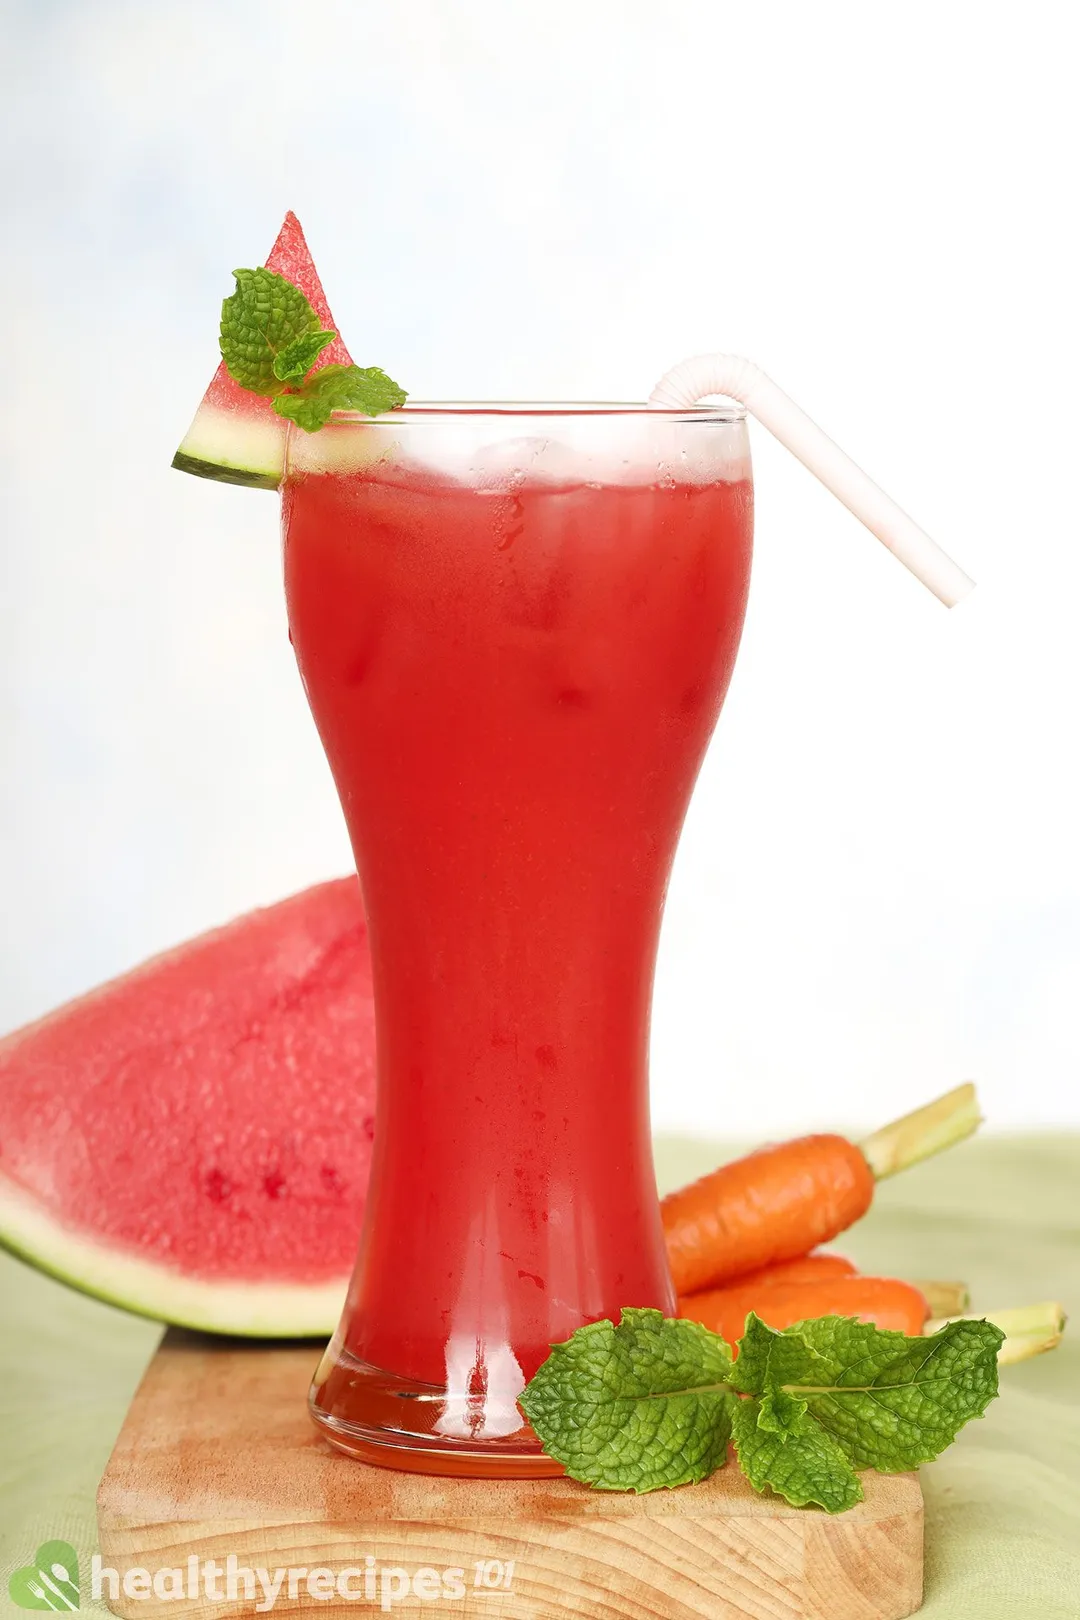 A tall glass of watermelon carrot juice placed on a wooden board with mint leaves, carrots, and a watermelon slice.